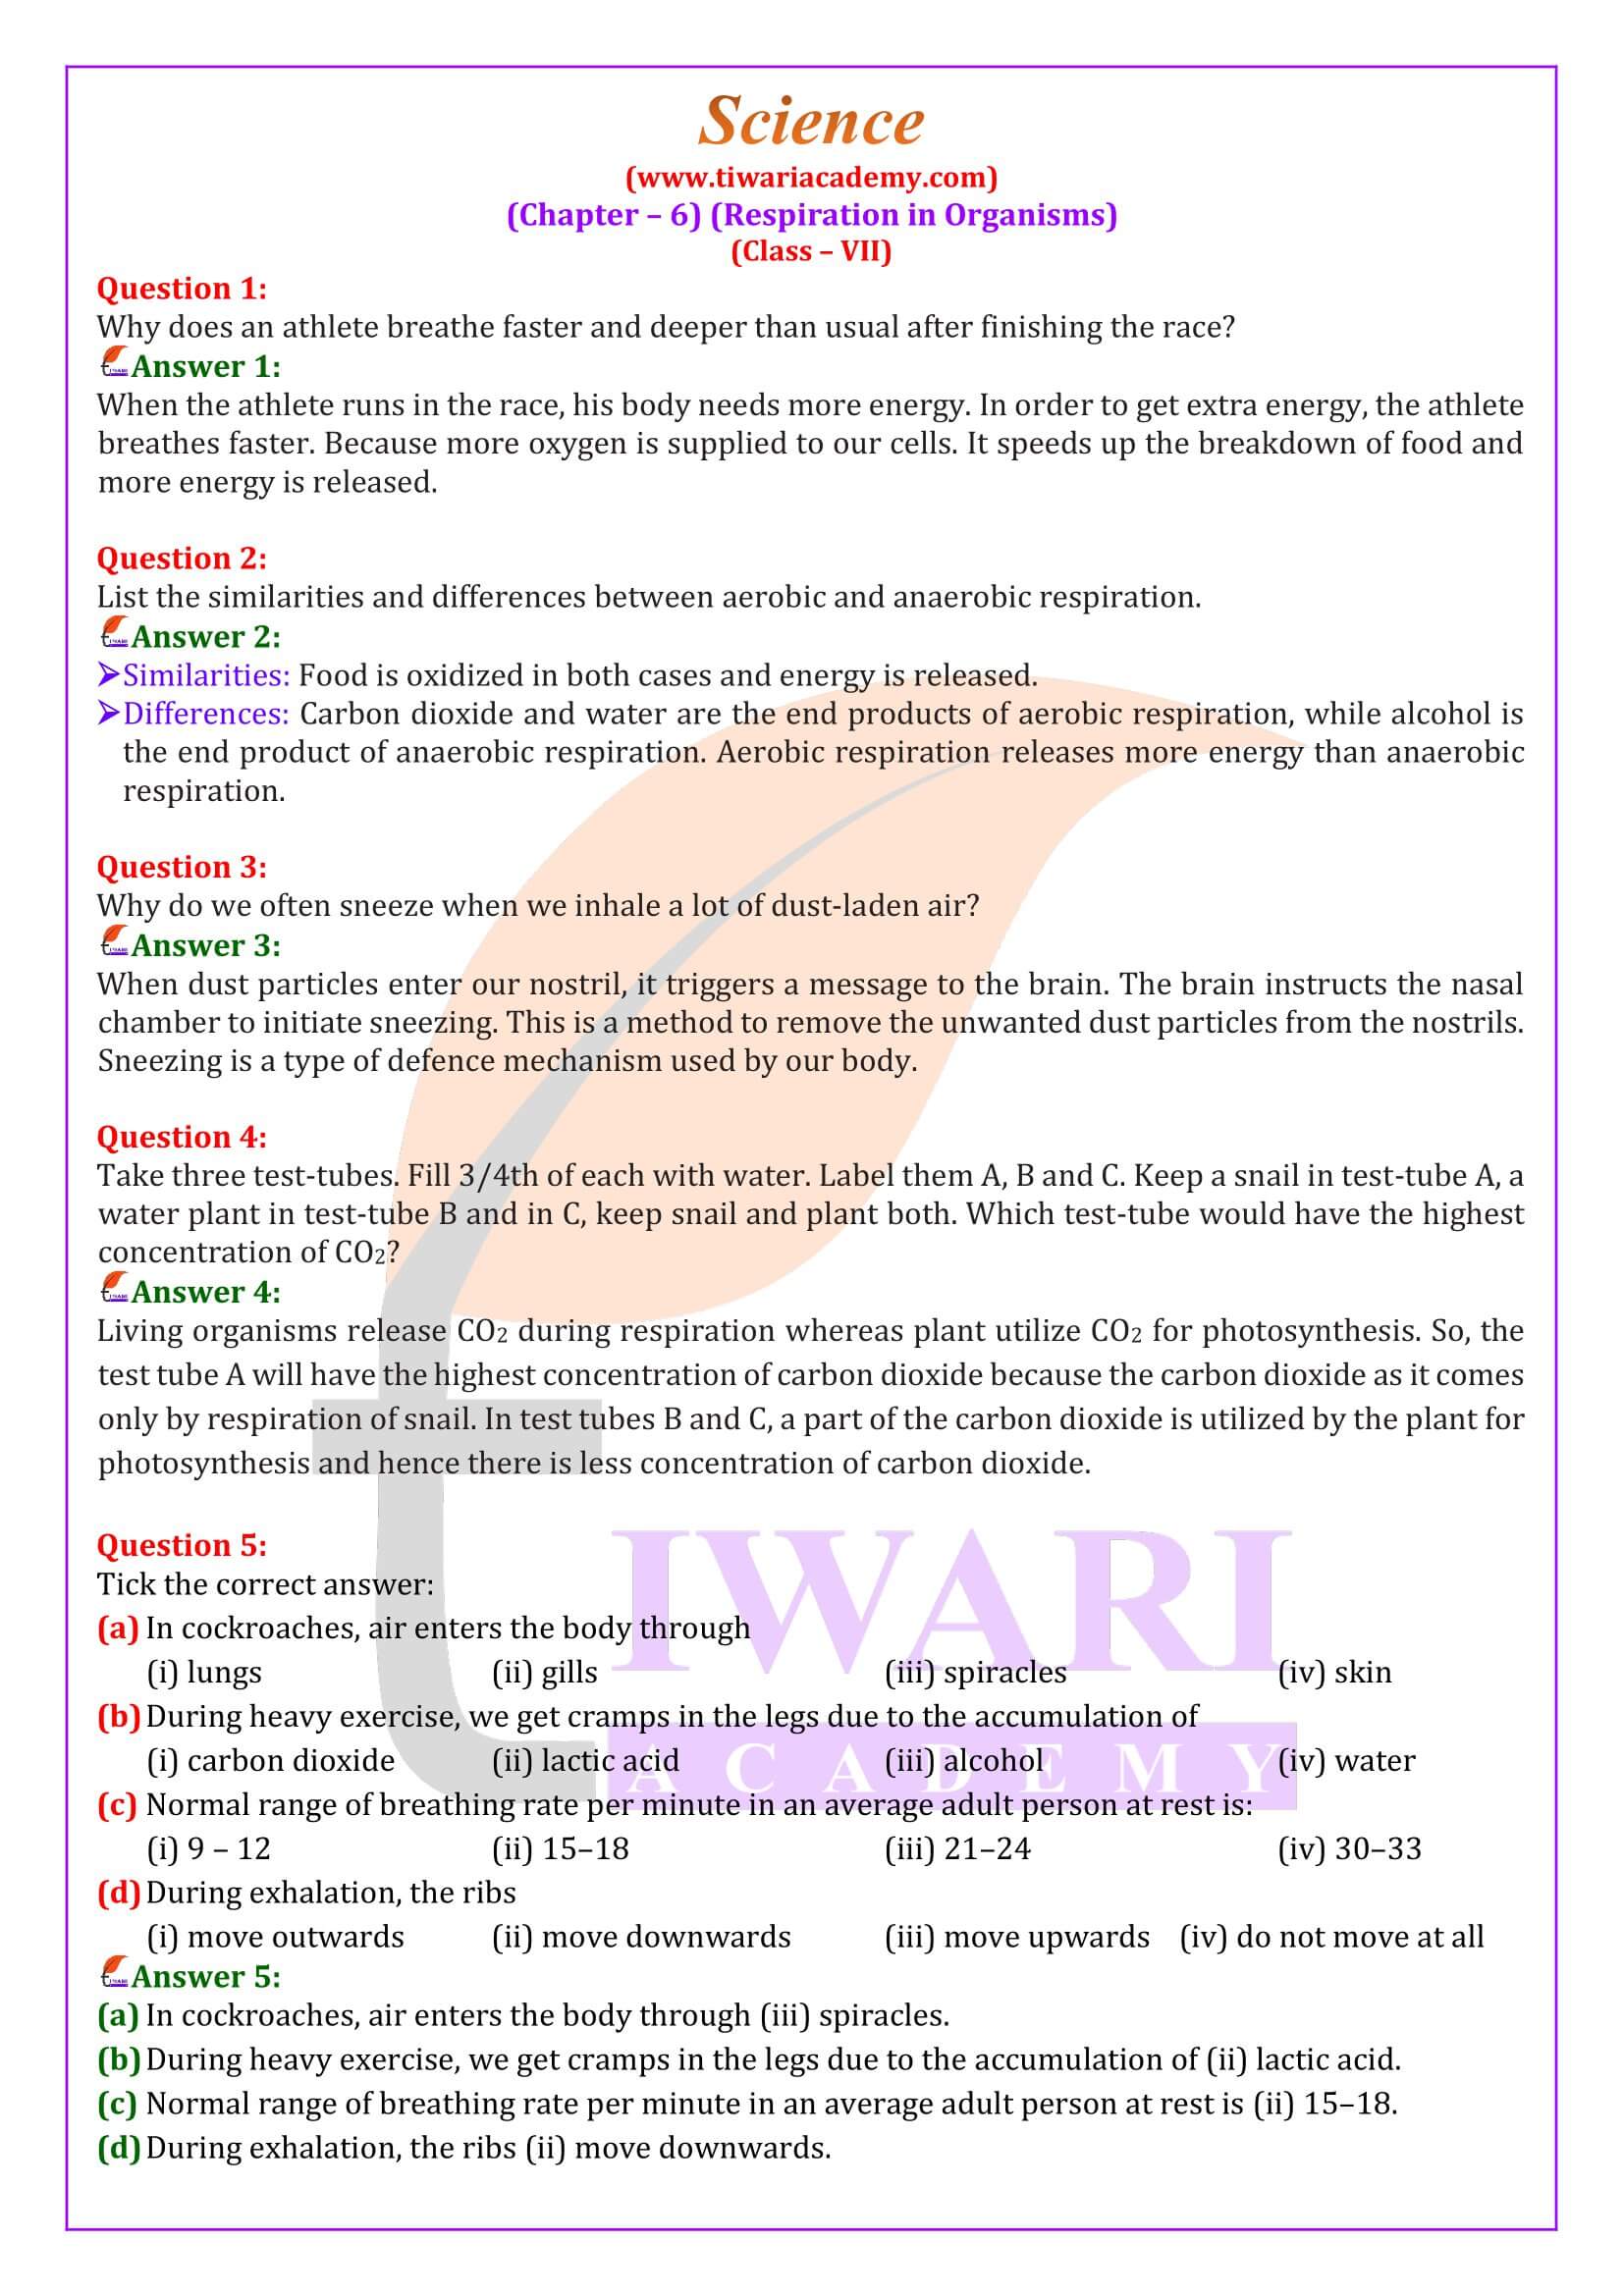 NCERT Solutions for Class 7 Science Chapter 6 in English Medium